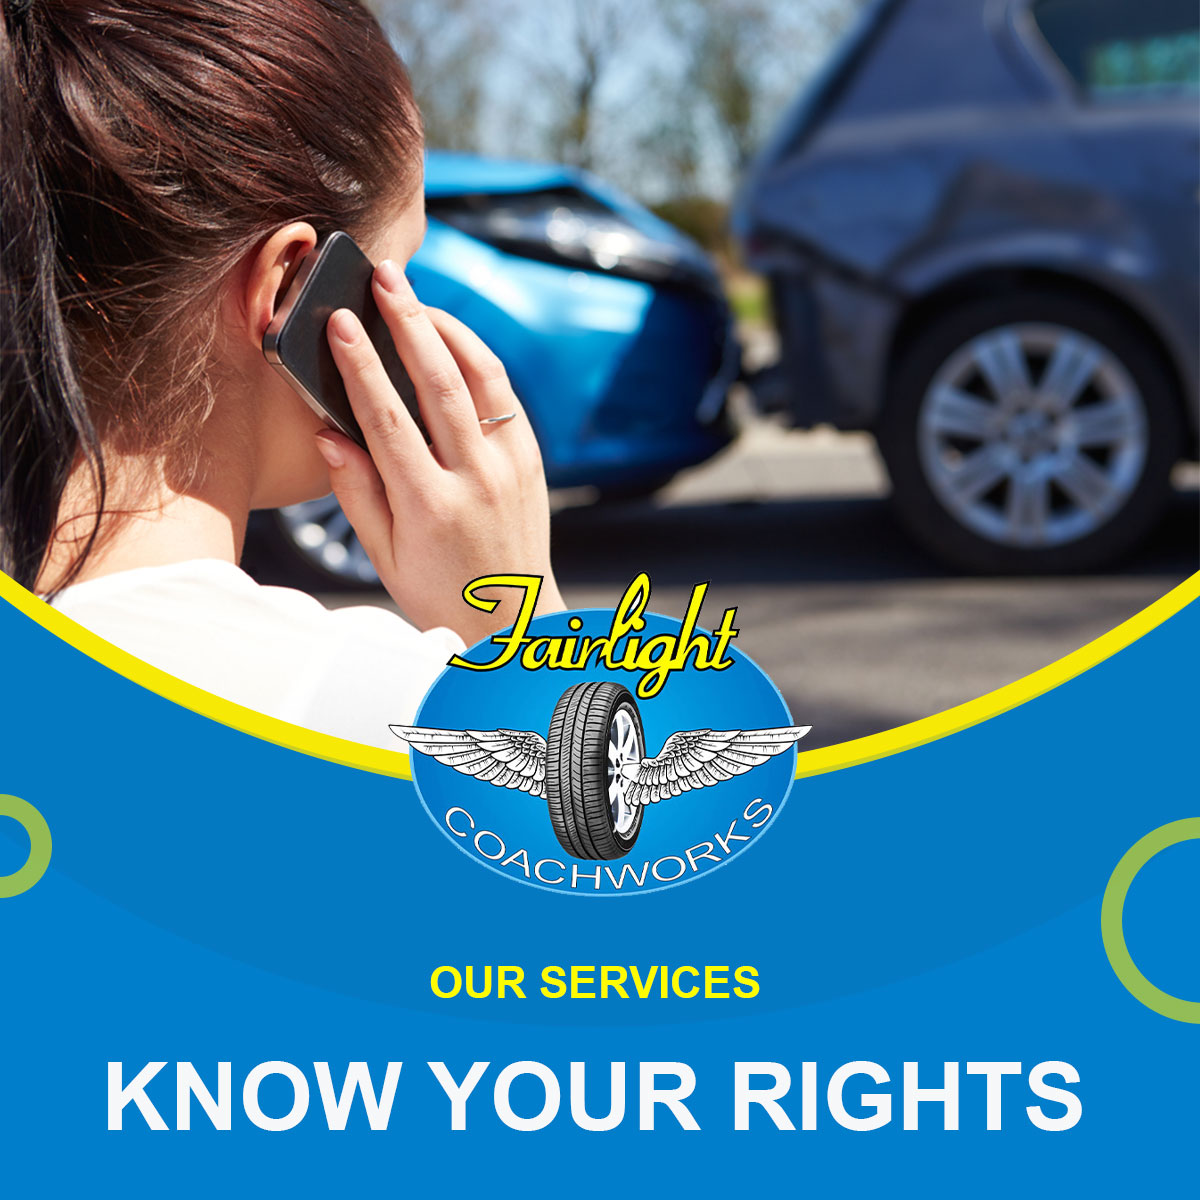 If you are involved in a motor accident, it's your #legalright to have your car repaired anywhere of your choice, your insurance company has an obligation to 'Treat customers fairly', you do not need to use your insurance company's establishment & you do not need two estimates